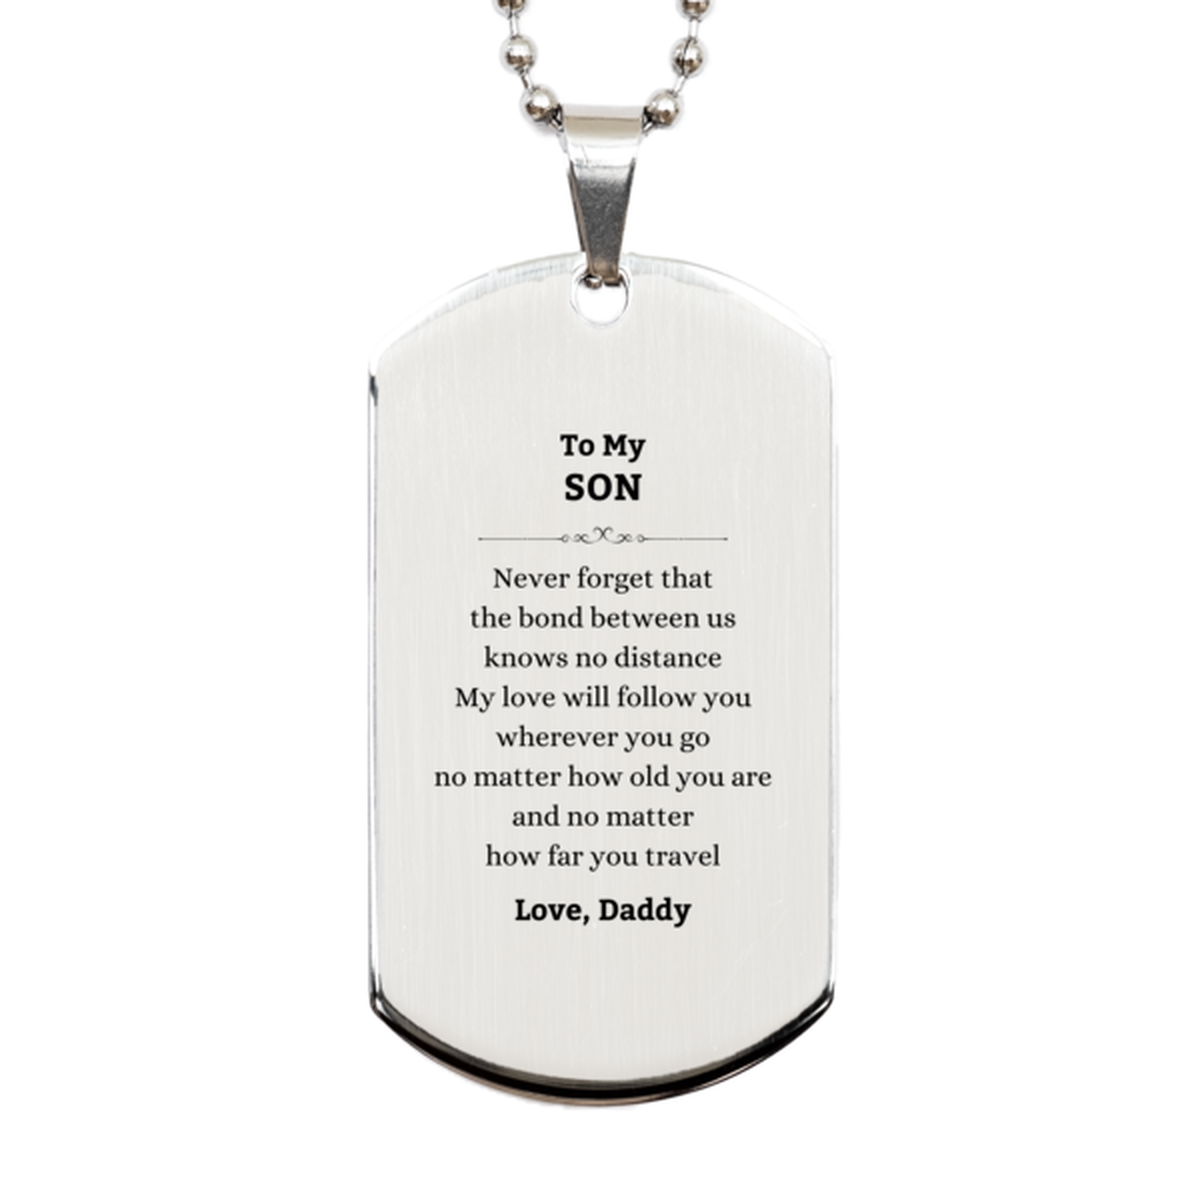 Son Birthday Gifts from Daddy, Adjustable Silver Dog Tag for Son Christmas Graduation Unique Gifts Son Never forget that the bond between us knows no distance. Love, Daddy